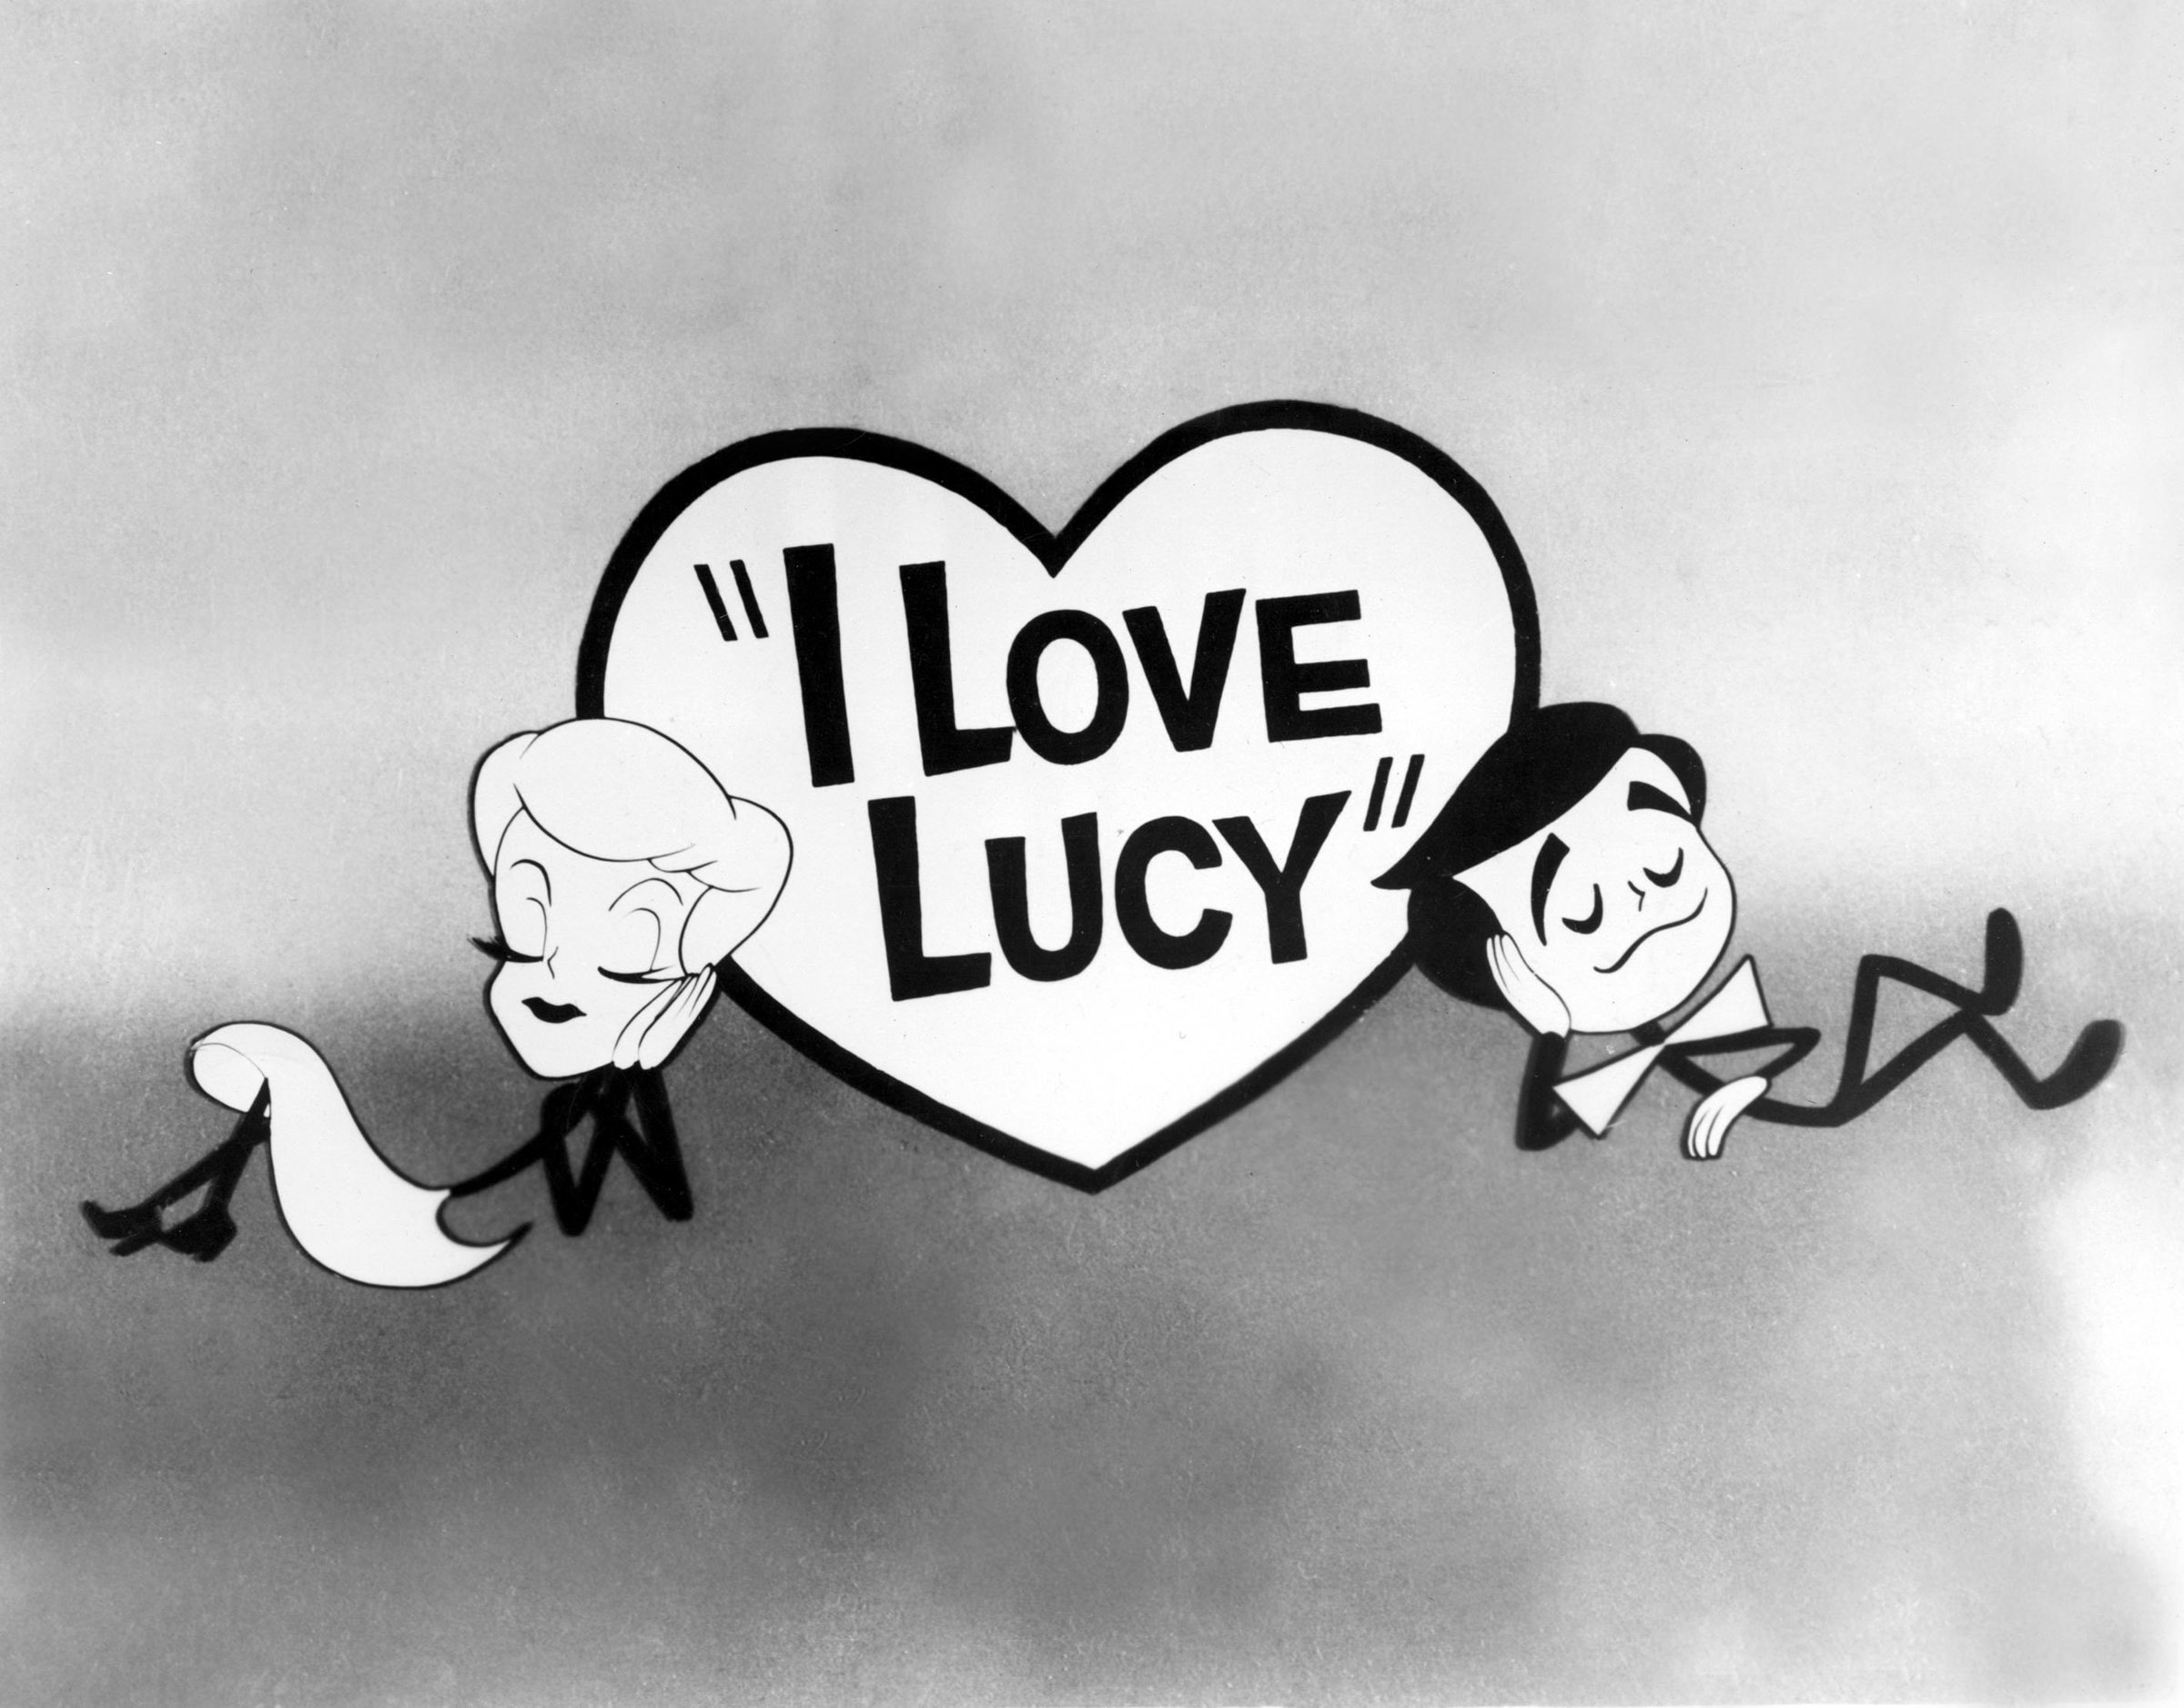 Cartoon characters of Lucille Ball and Desi Arnaz lean against a heart with &quot;I Love Lucy&quot; written inside